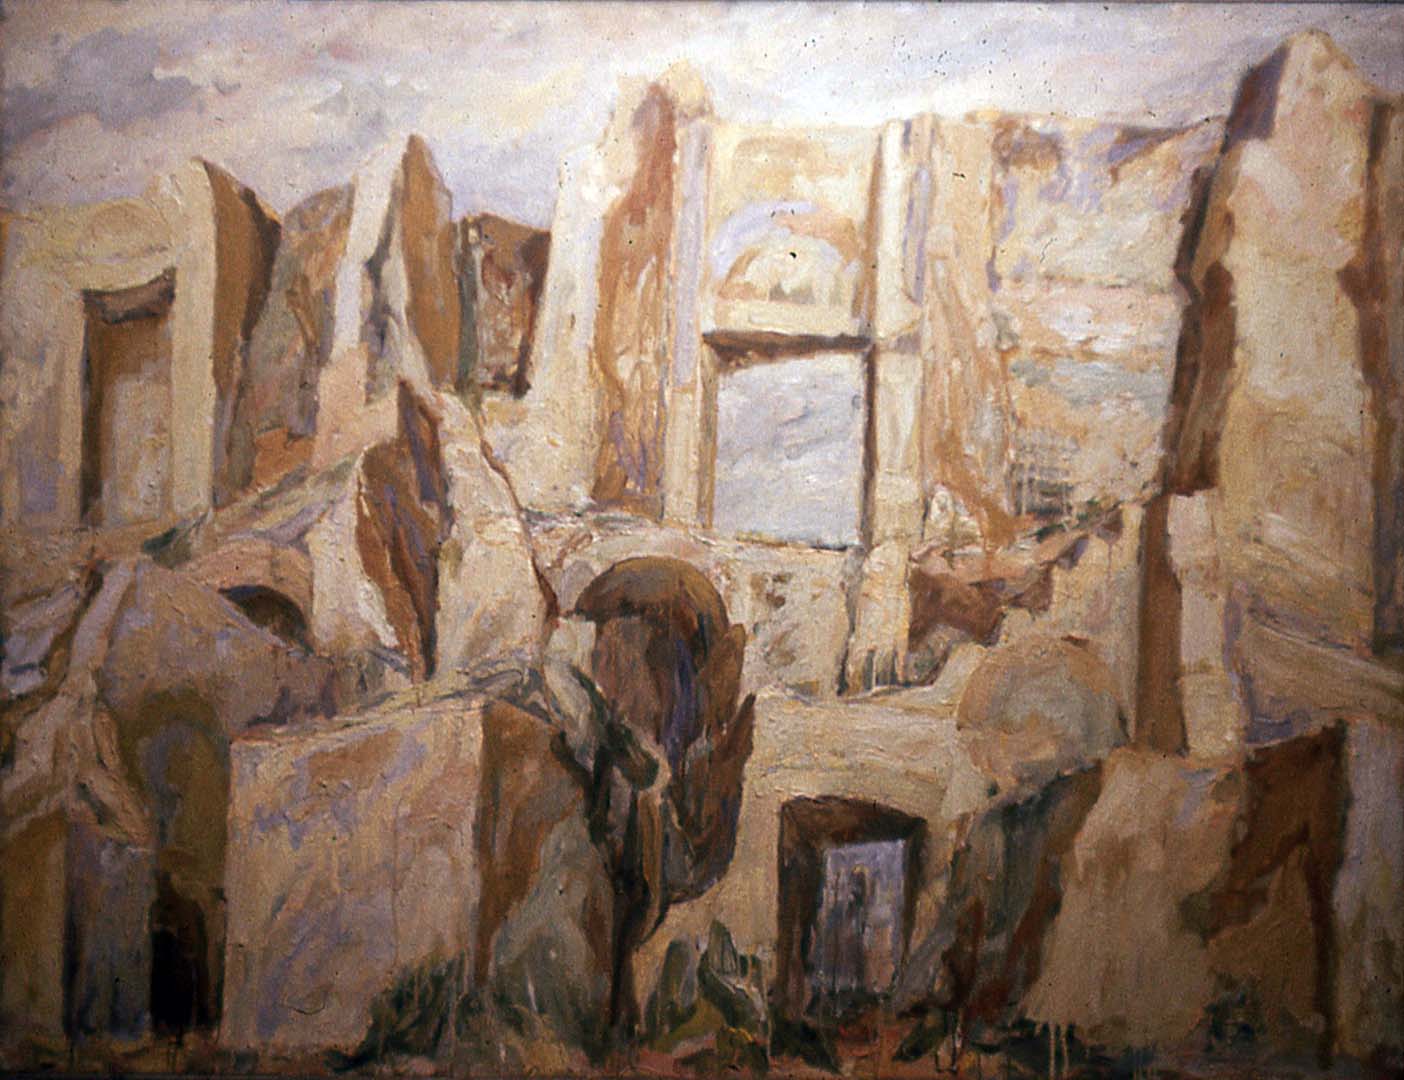 1959 Imperial Palace Oil on Canvas 52 x 69